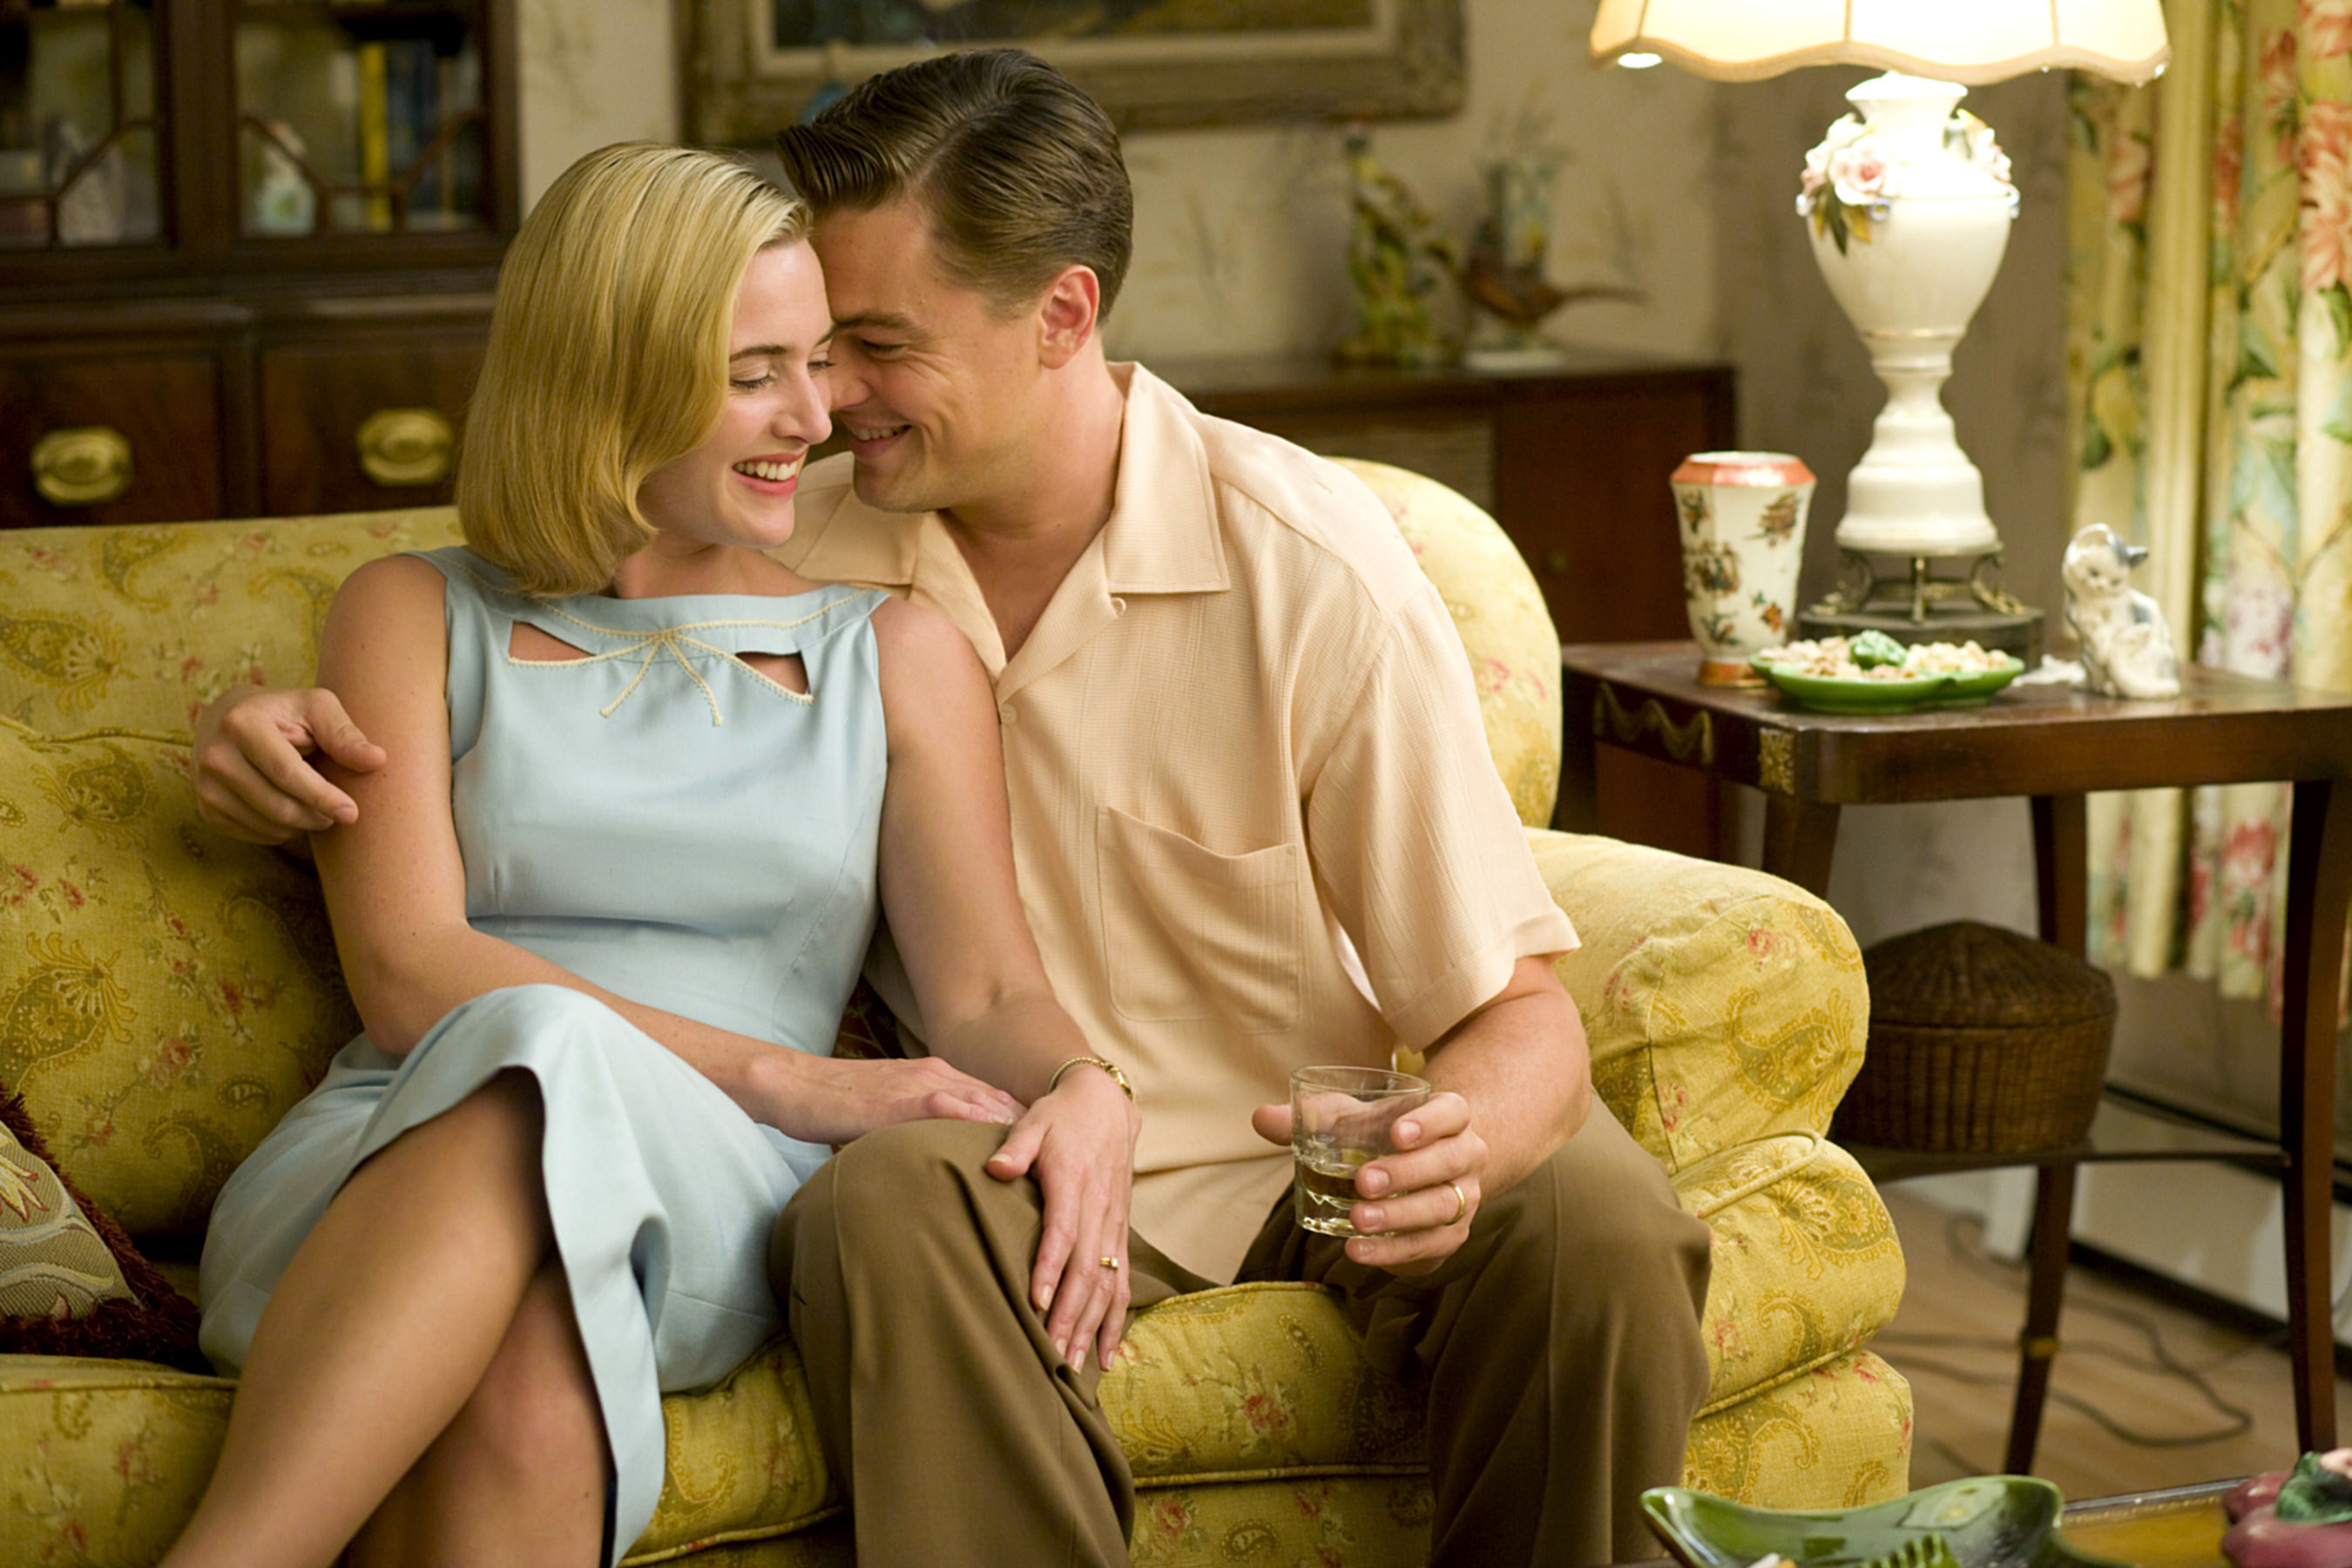 Kate Winslet and Leonardo DiCaprio sit on a couch